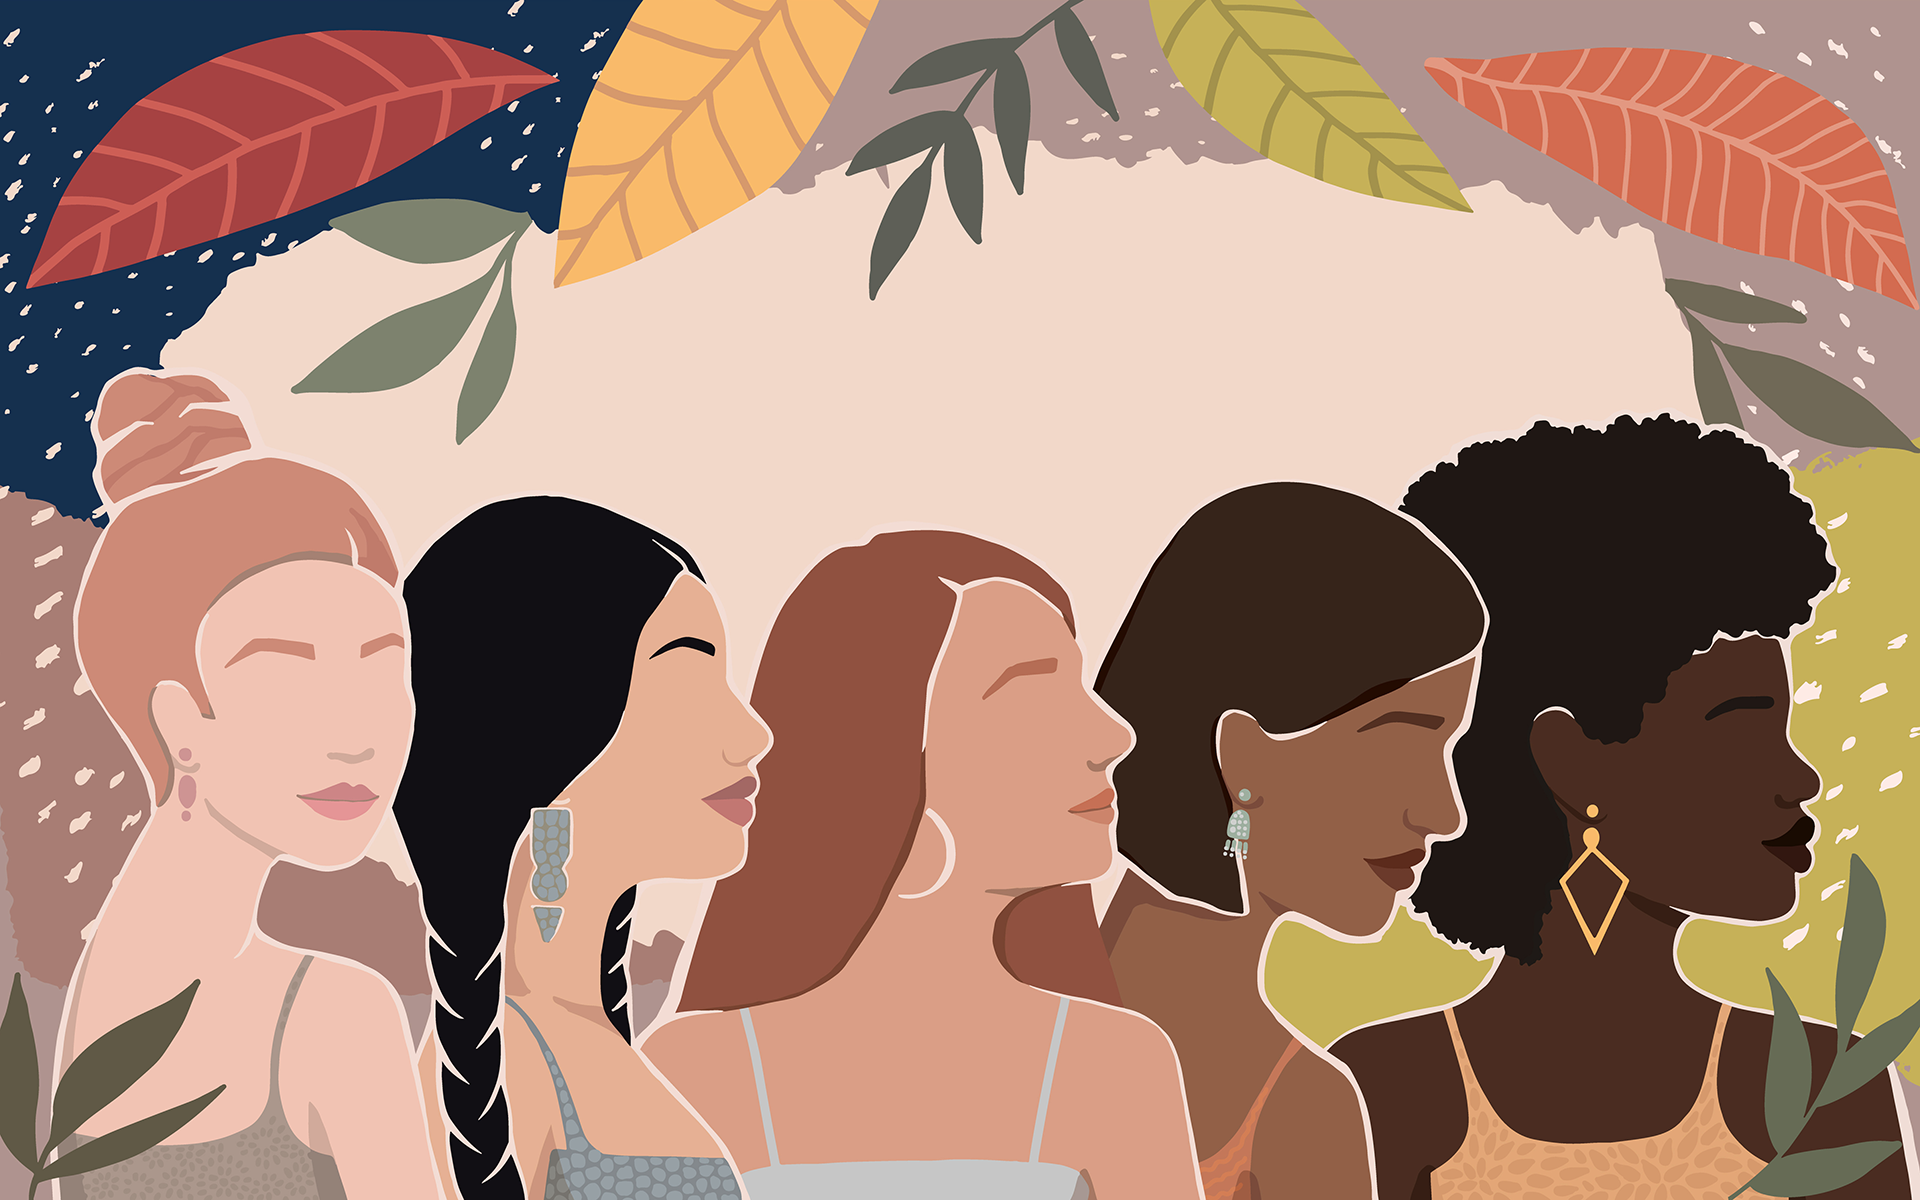 10 Powerful Women of the Mindfulness Movement- 2022—Illustration of five diverse women in a line with a background of red, yellow, green, and brown foliage.